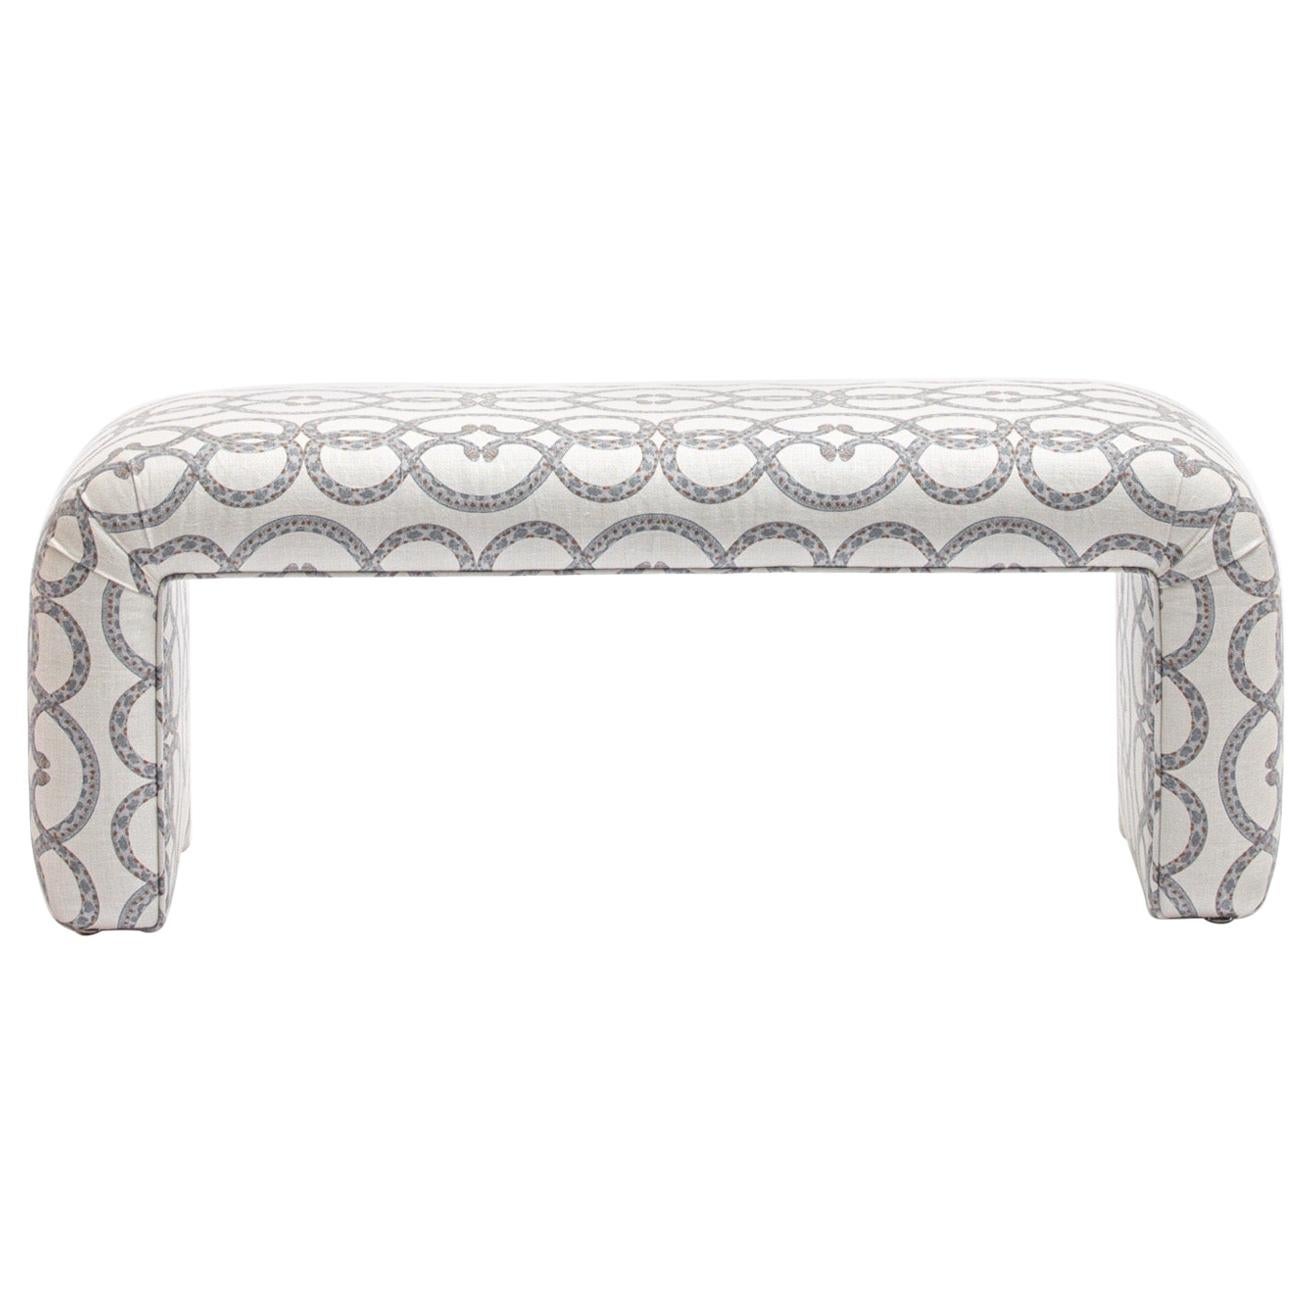 Karl Springer Style Waterfall Bench in Snake Pattern Ivory Linen Fabric